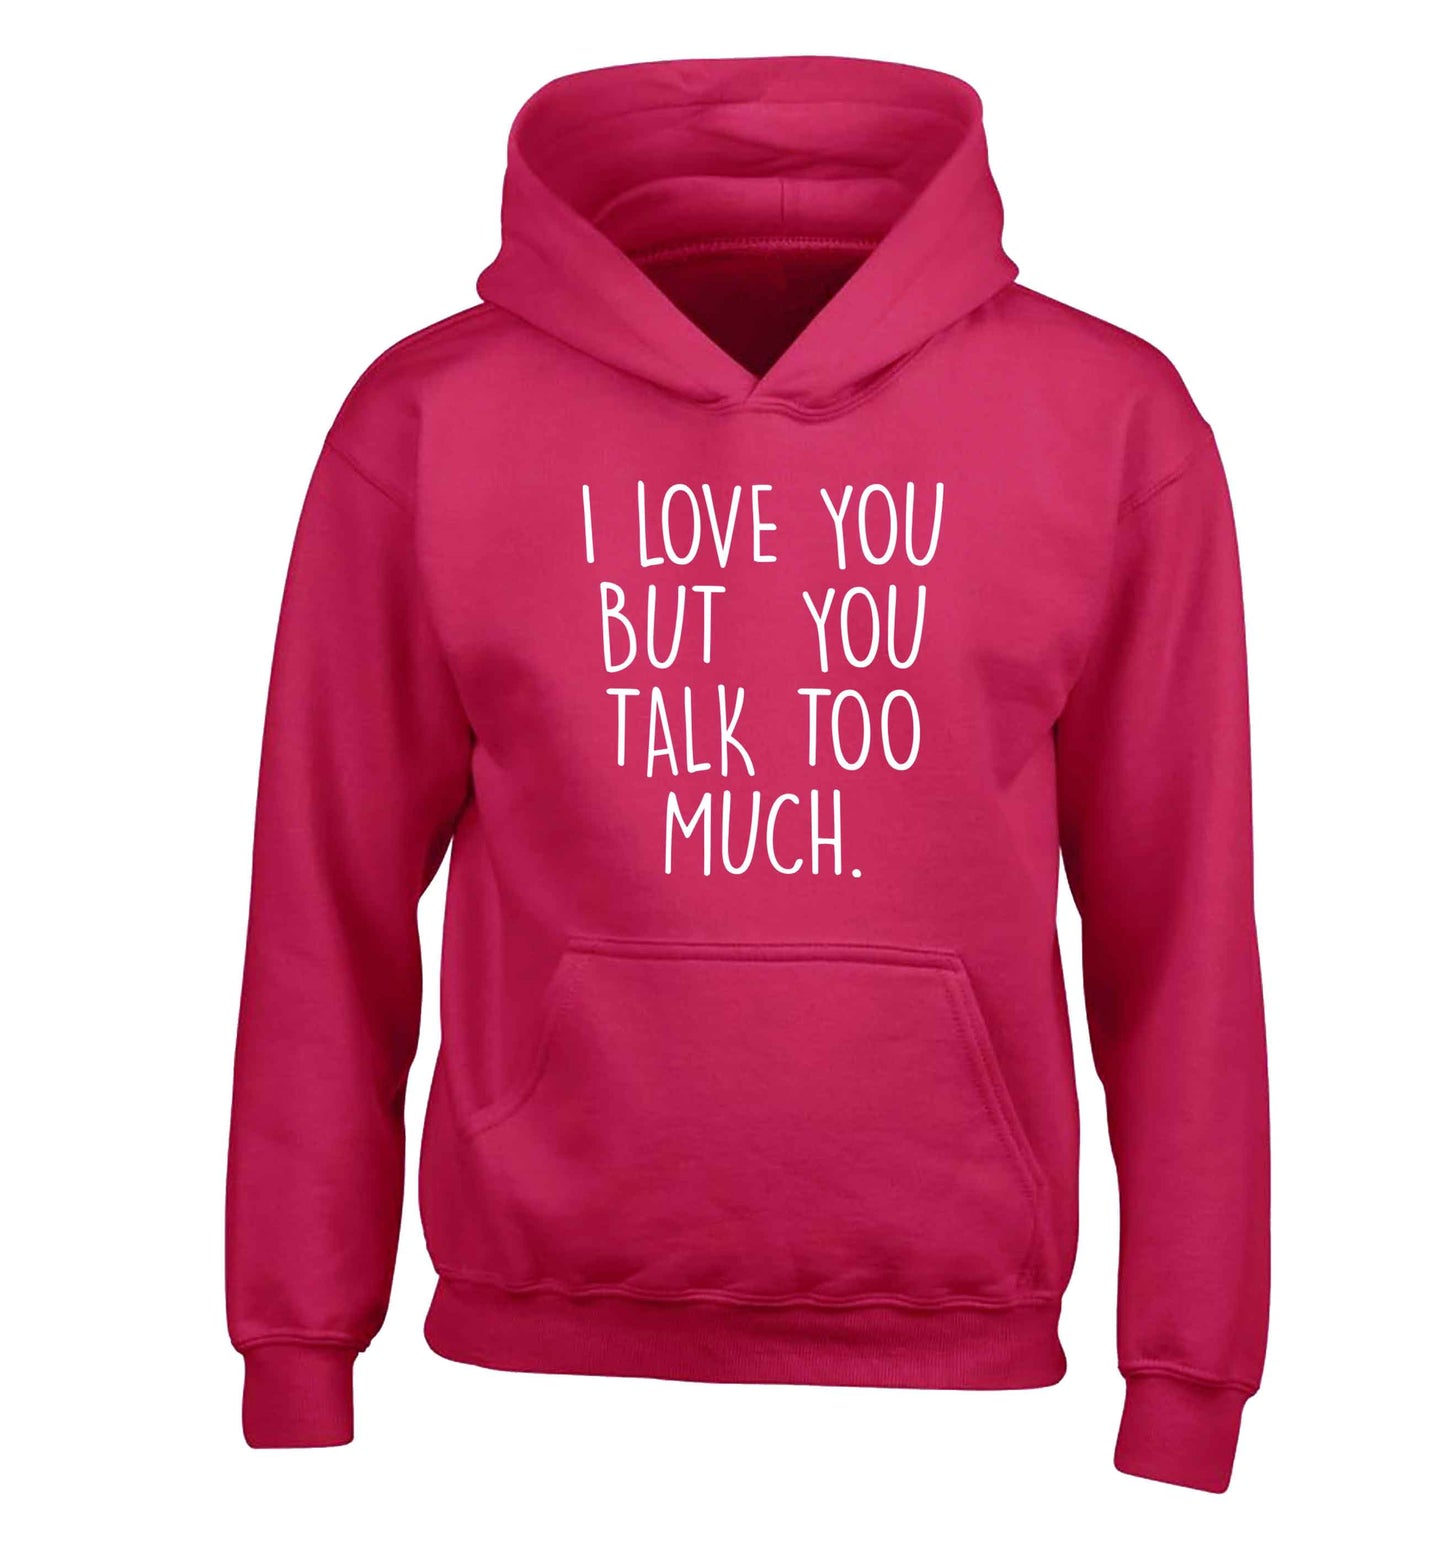 I love you but you talk too much children's pink hoodie 12-13 Years